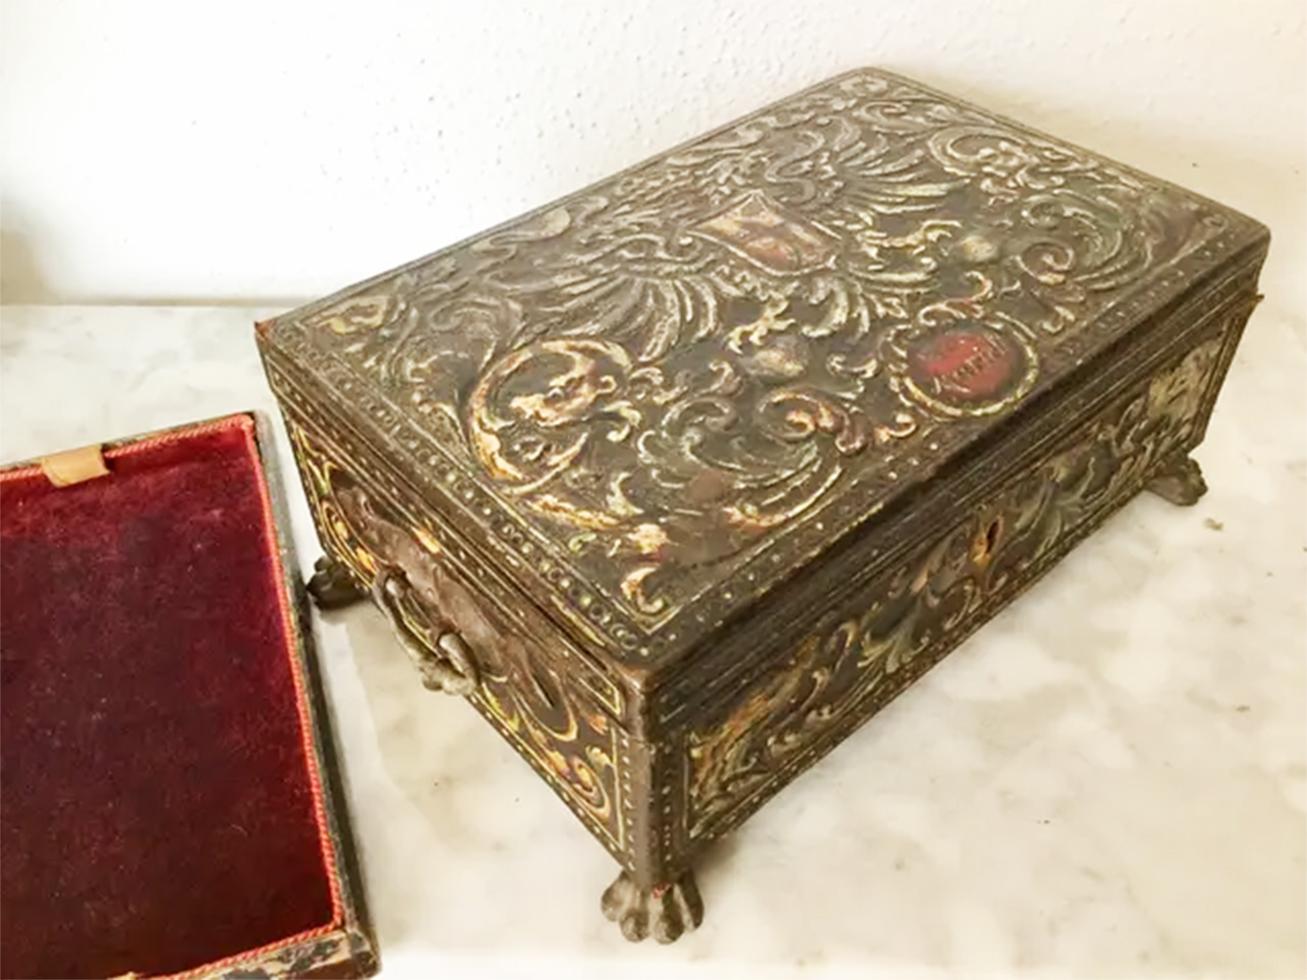 Other Box Lined with Hand-Embossed Leather 'Cordoman' and Silk Velvet, 18th Century